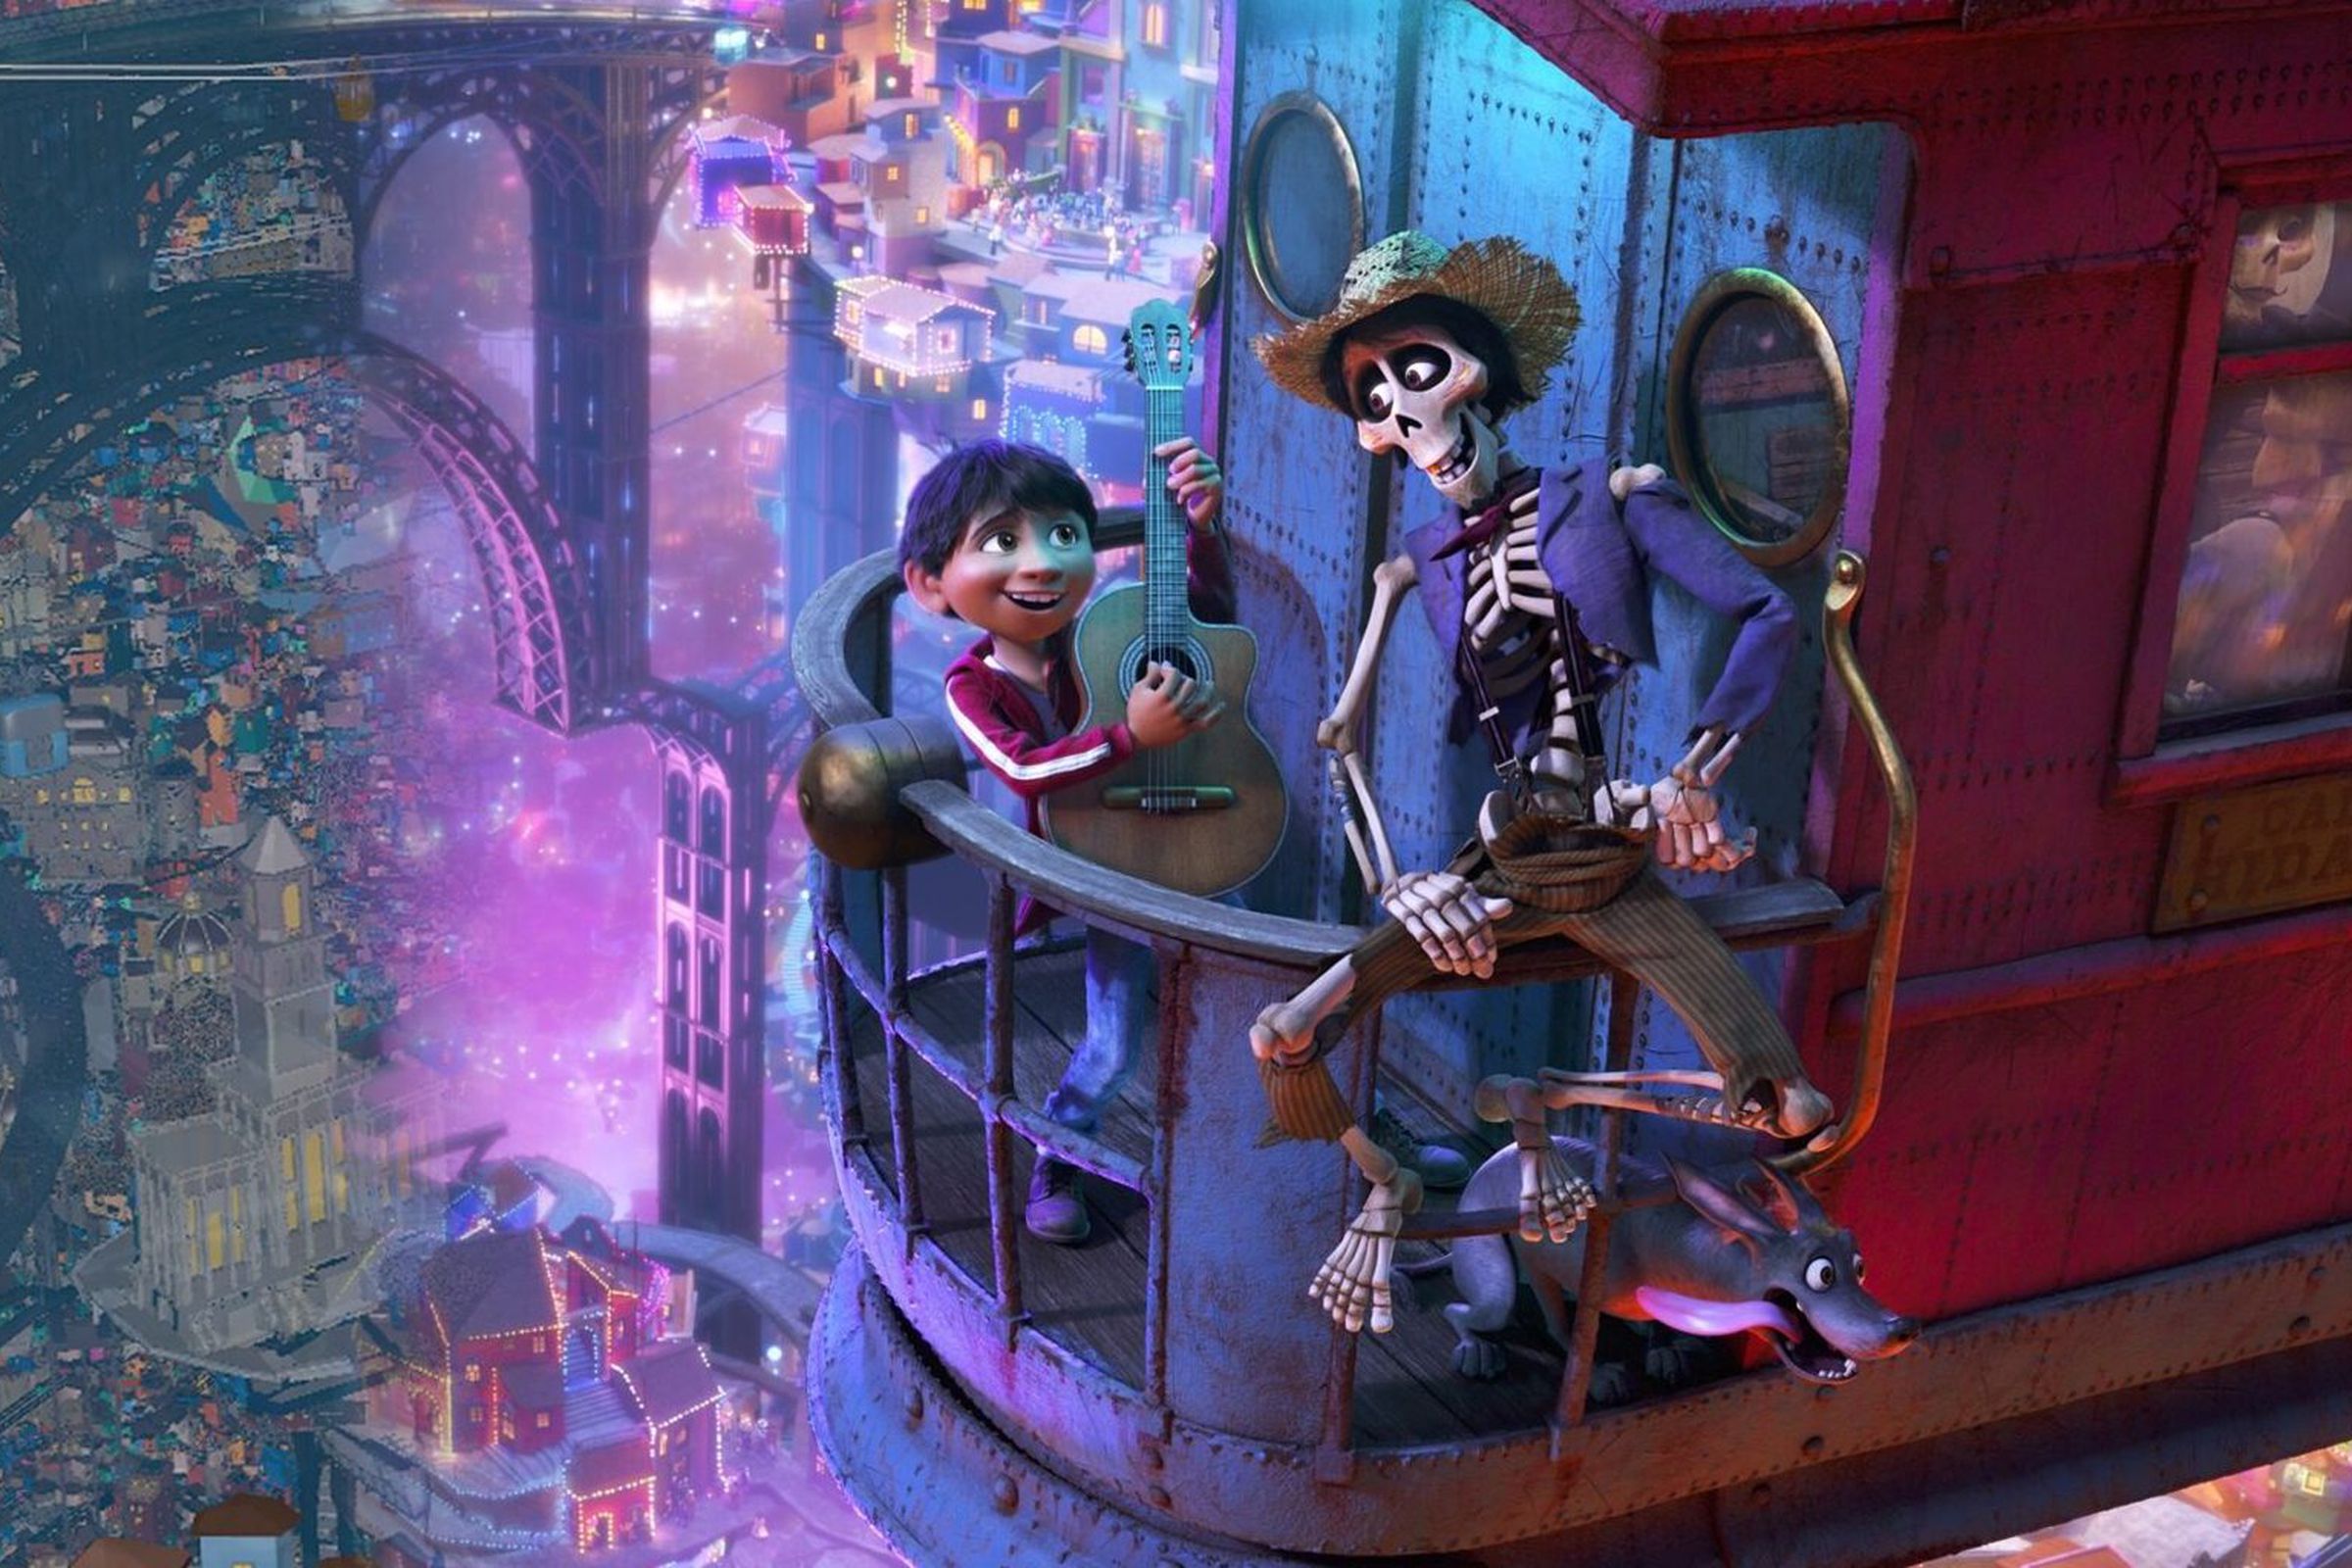 An image showing an in-progress still from the movie Coco blending into the final image.